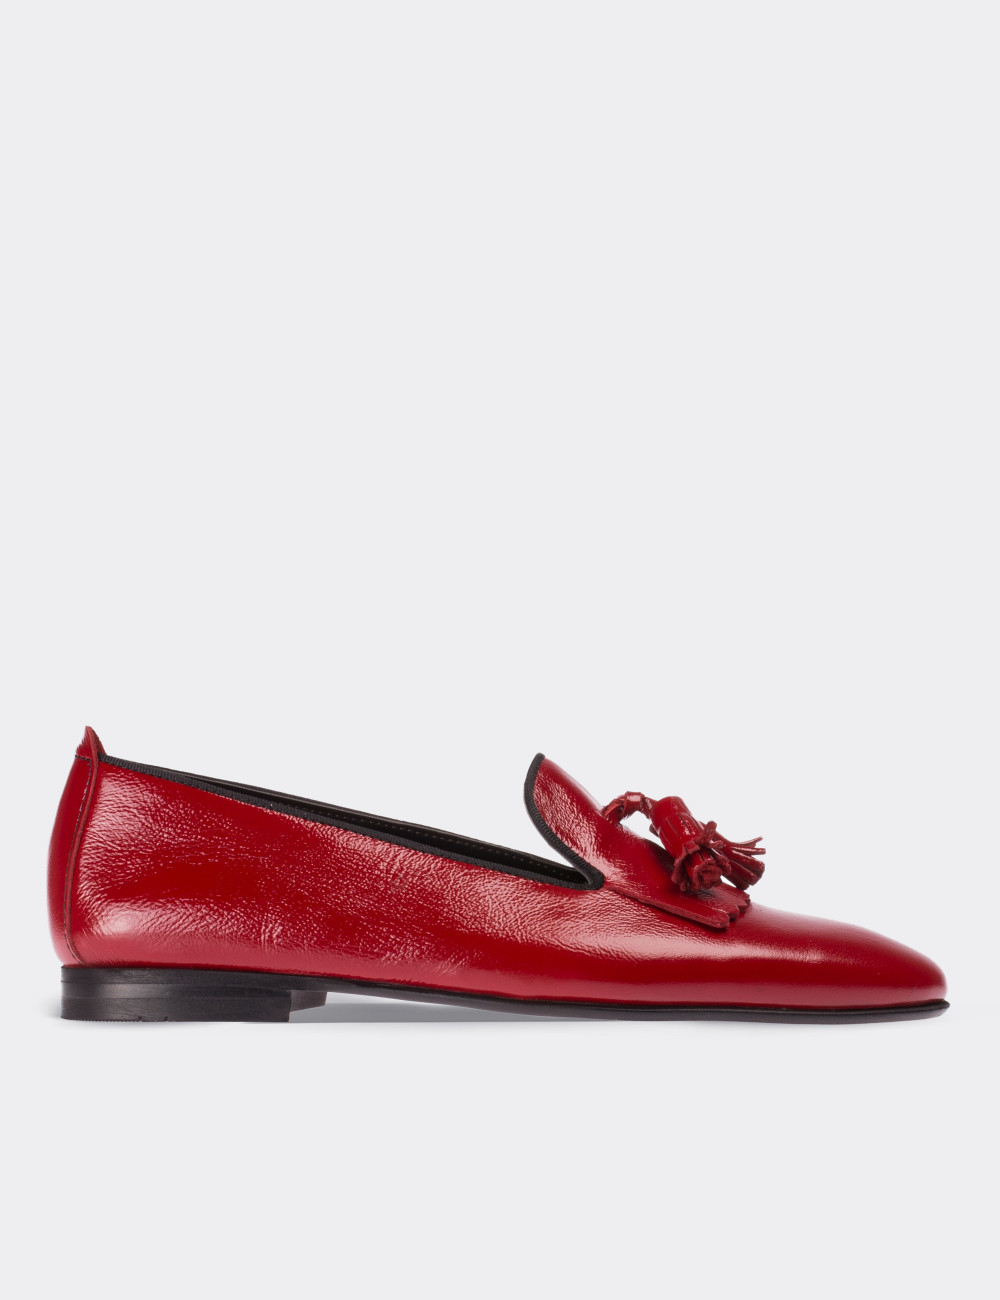 Red Patent Leather Loafers - 01612ZKRMM02